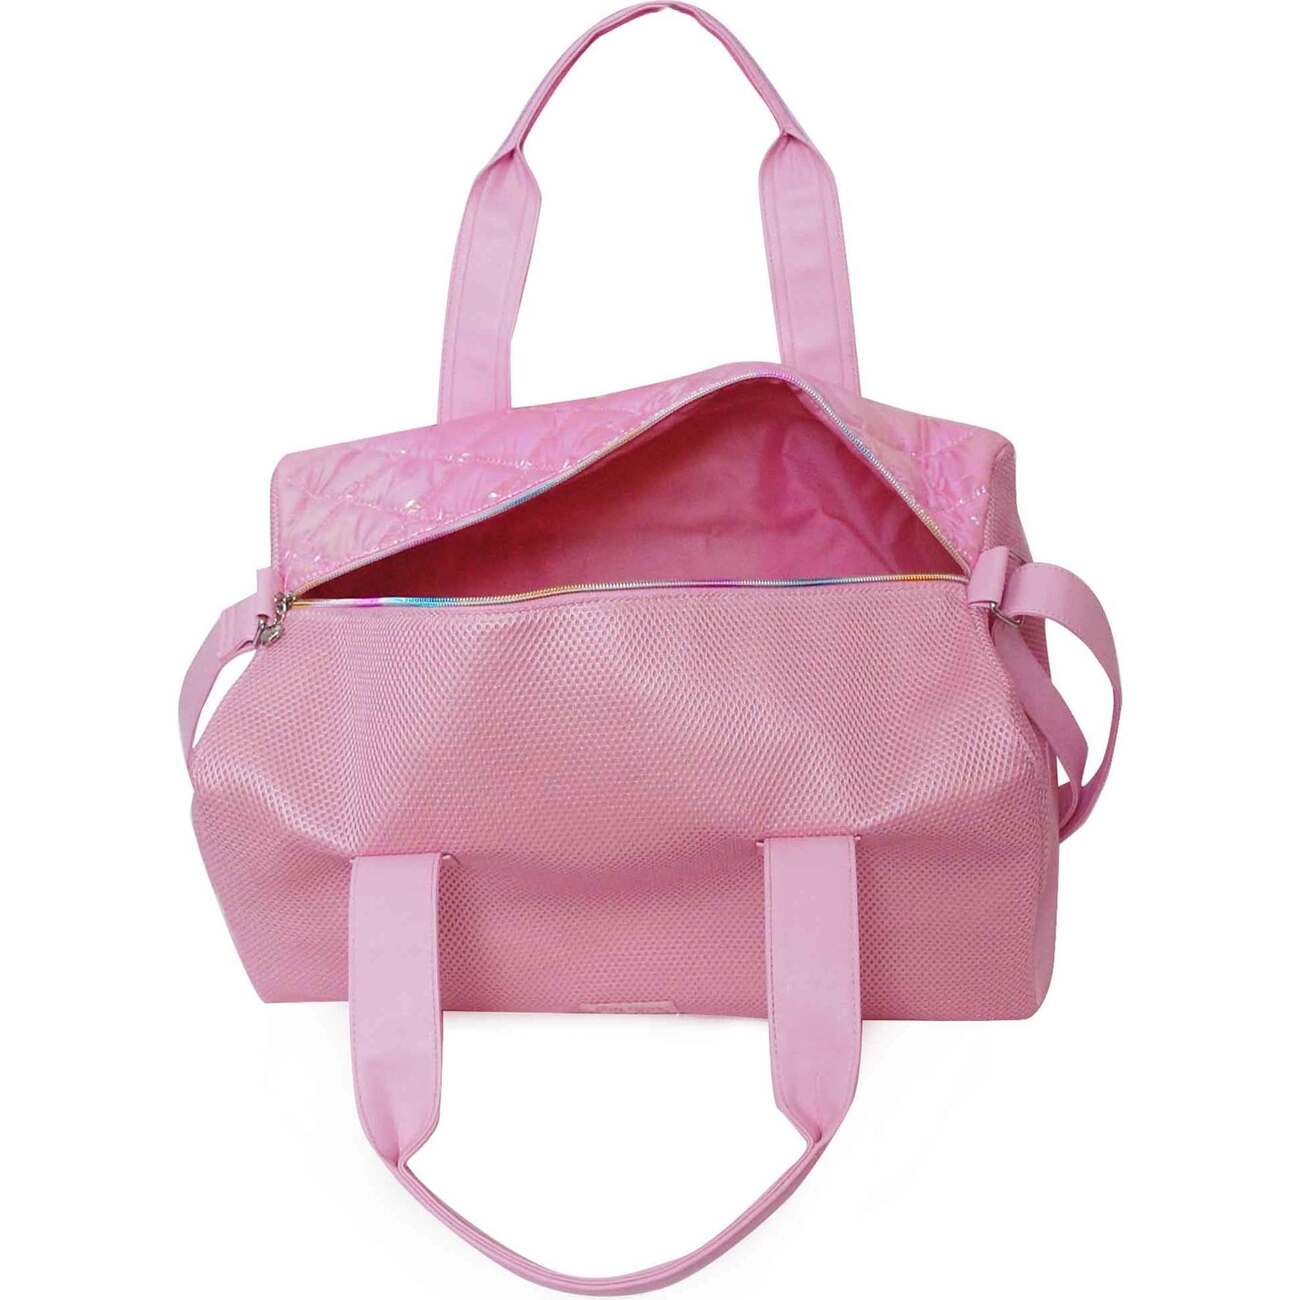 OMG Accessories Pink Quilted 'Sleepover' Duffle Bag